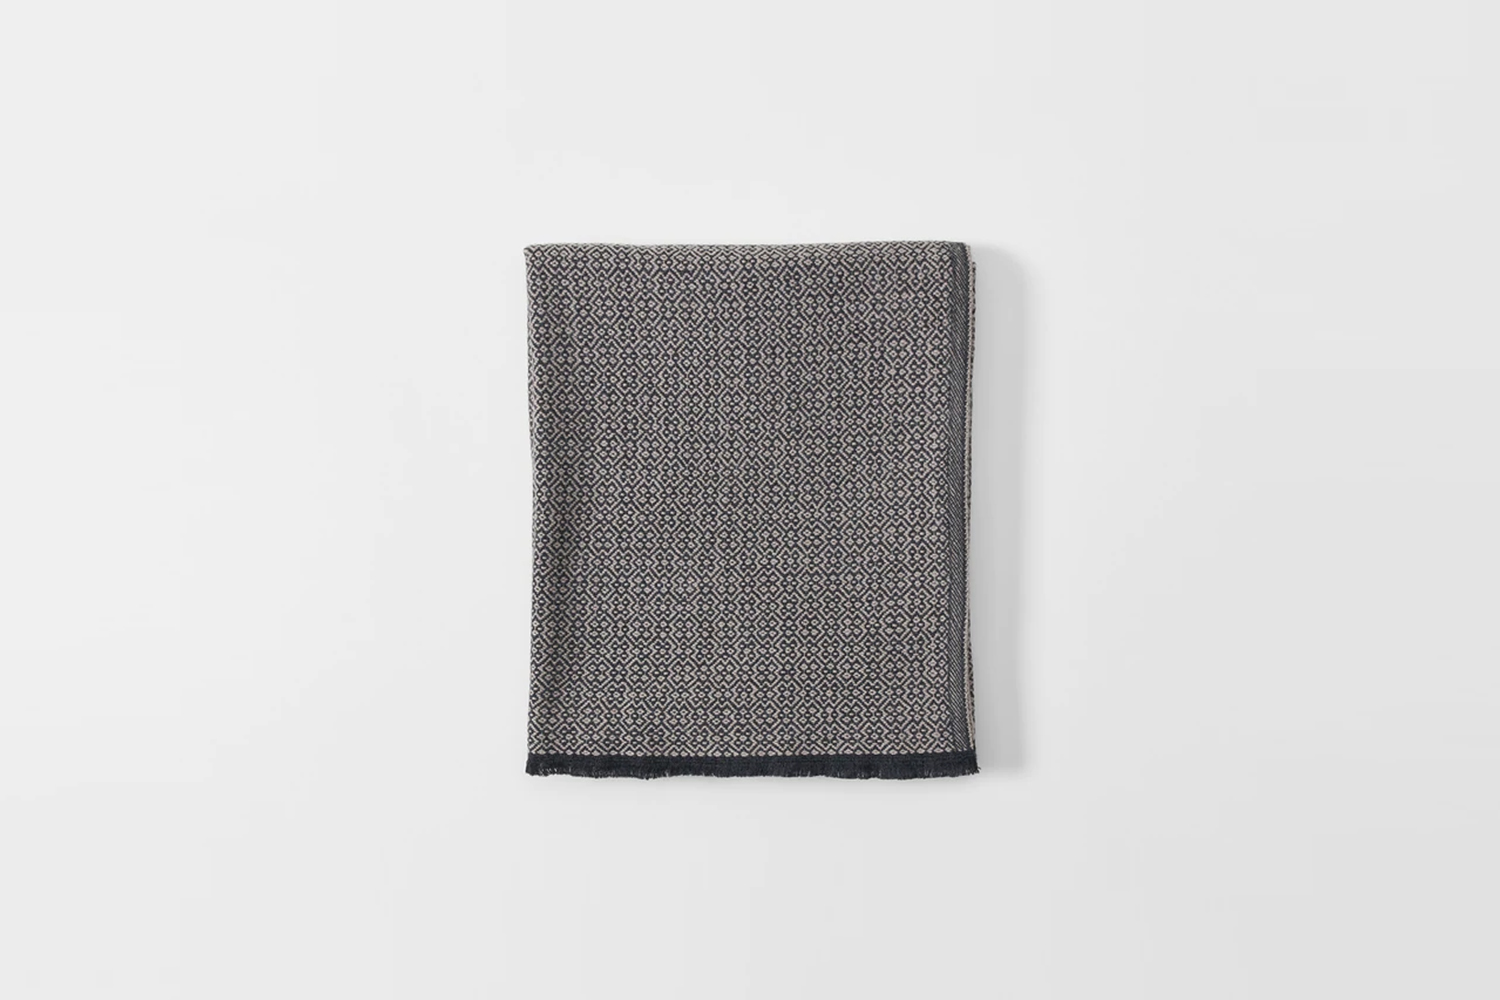 the mäki black throw blanket is \$\200 at march. 22